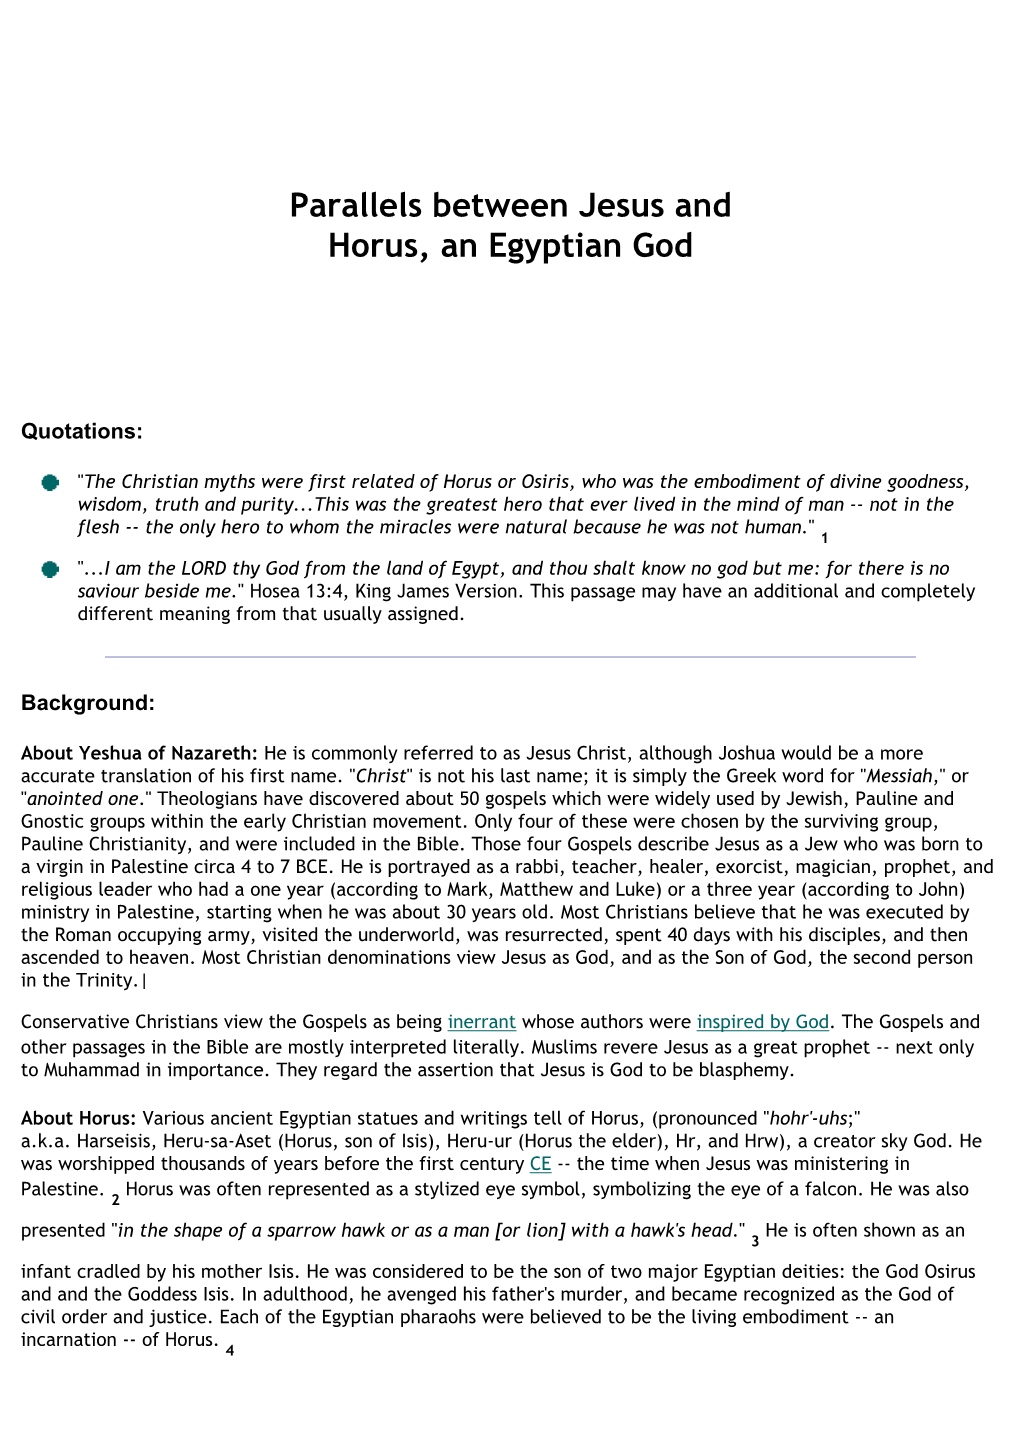 Parallels Between the Lives of Jesus and Horus, an Egyptian